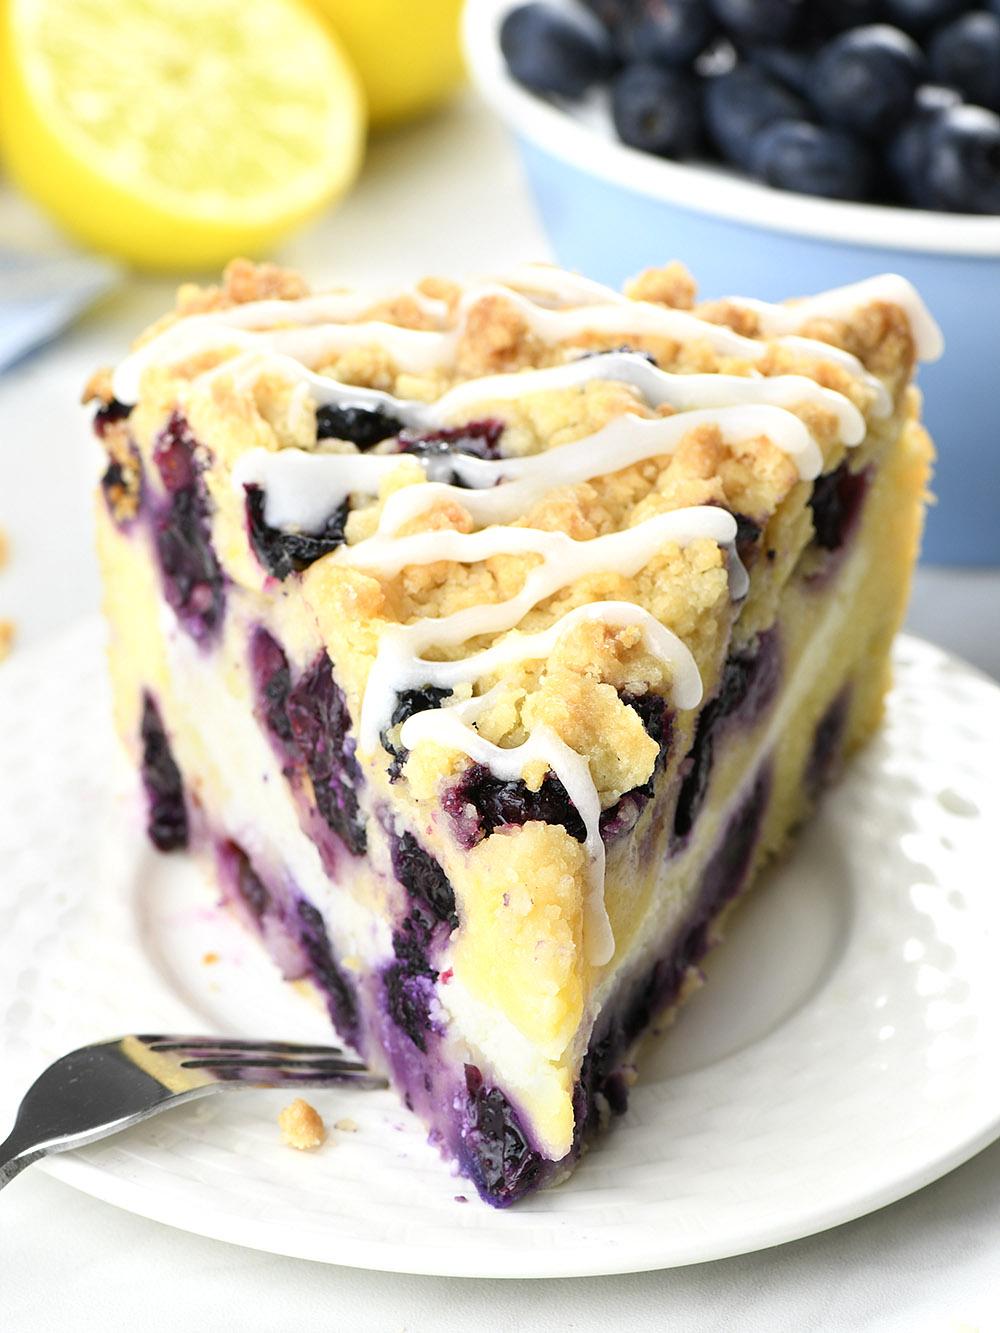 This image features a tantalizing slice of Lemon Blueberry Coffee Cake positioned front and center on a pristine white plate. The cake itself is a golden-brown hue, with a dense, moist texture visible from the cut side. Pockets of vibrant blueberries are embedded throughout, providing a lovely color contrast. The top of the cake boasts a sugary crumble topping, while a tangy lemon glaze zigzags across it, adding a glossy finish. In the soft-focus background, fresh, bright yellow lemons and plump, ripe blueberries are scattered, hinting at the natural, fruity flavors incorporated in the cake. Overall, the photo invokes a sense of freshness and indulgence.